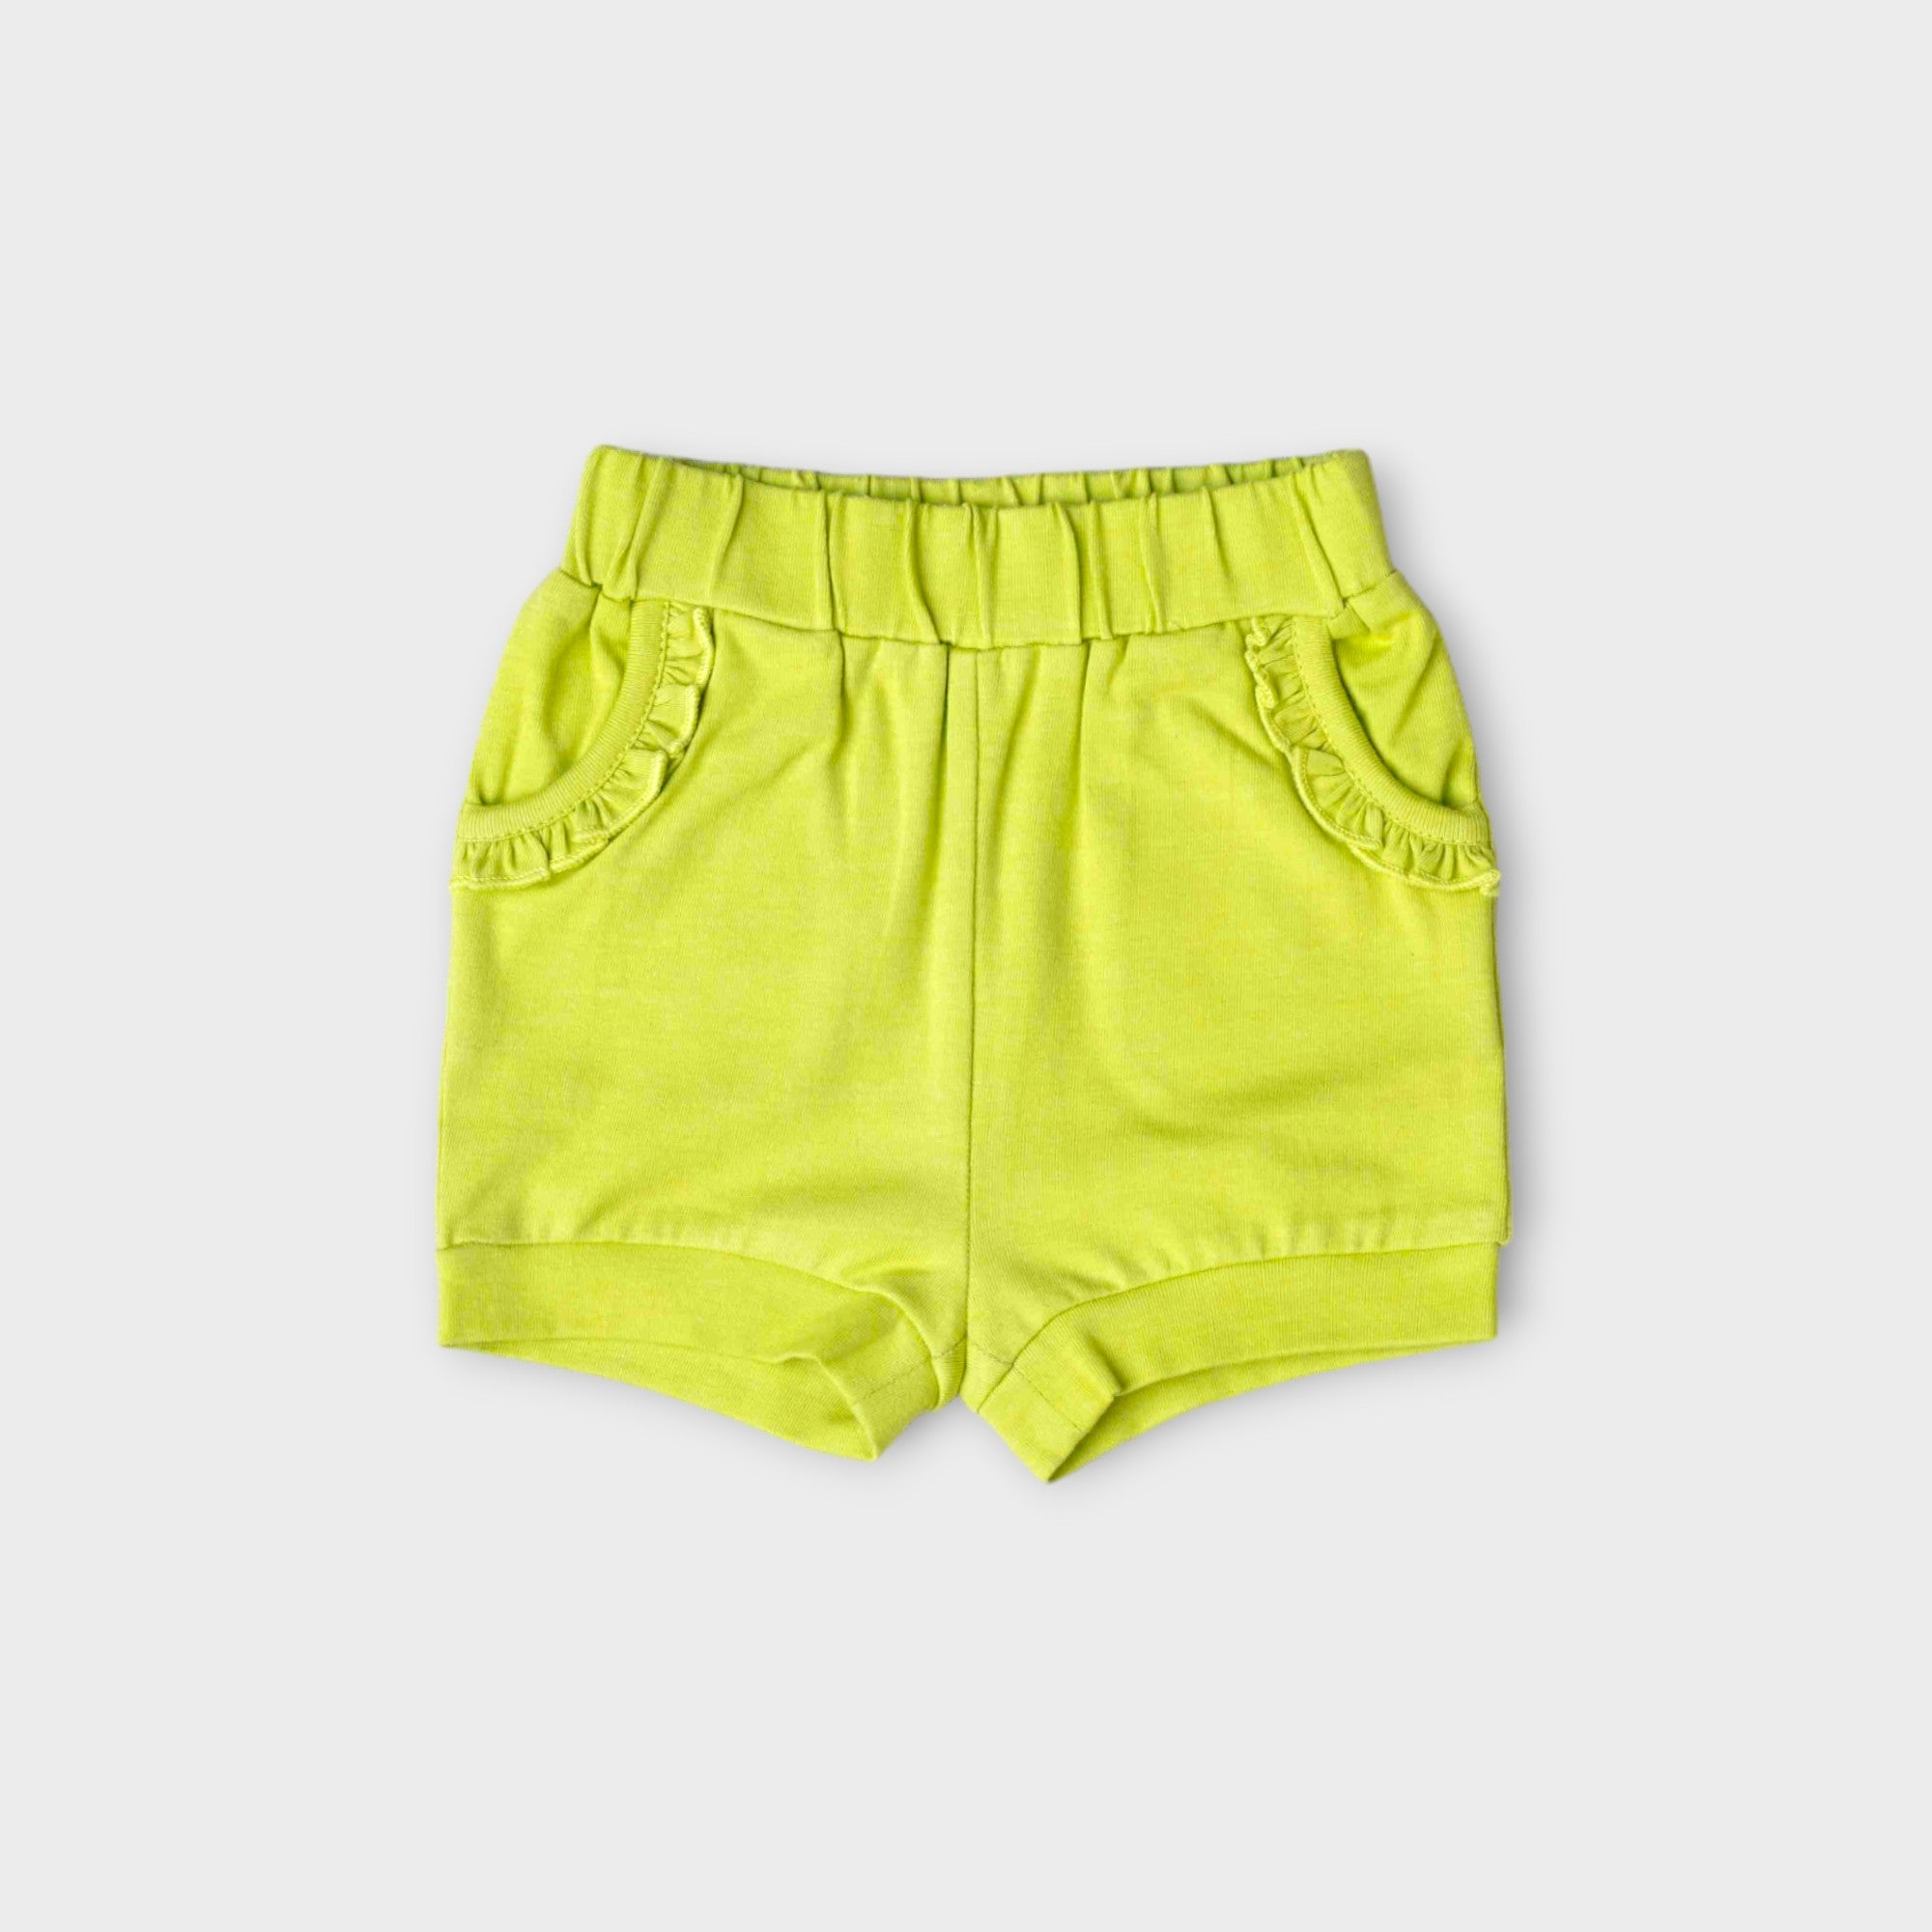 SPORTS SHORTS WITH ELASTIC WAISTBAND, SIDE POCKETS WITH FRILL | LIME